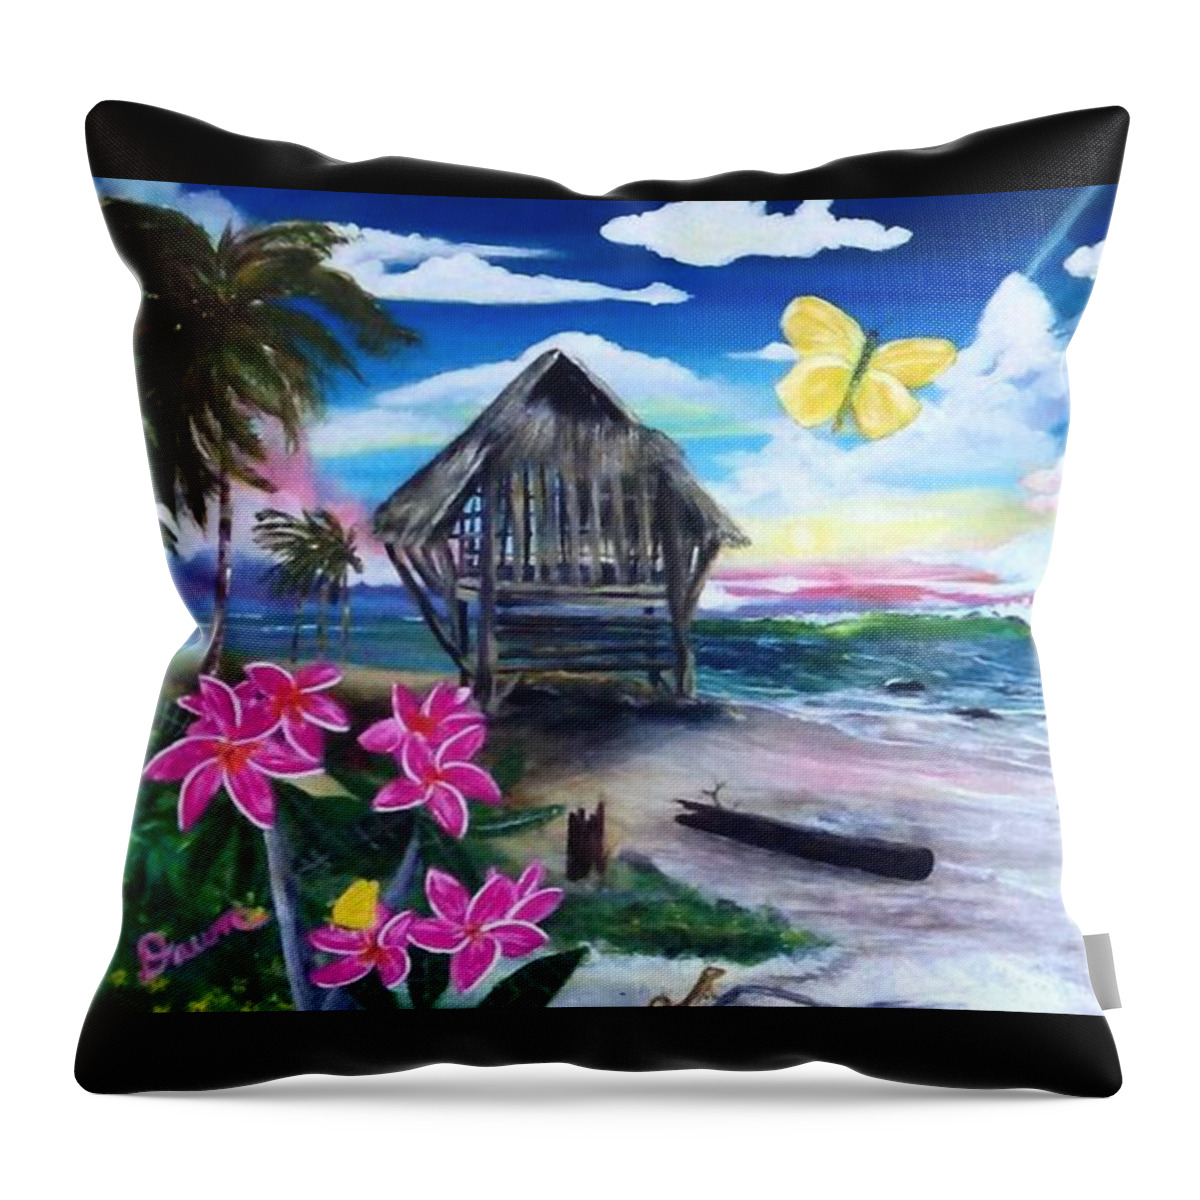 Florida Throw Pillow featuring the painting Florida Room by Dawn Harrell